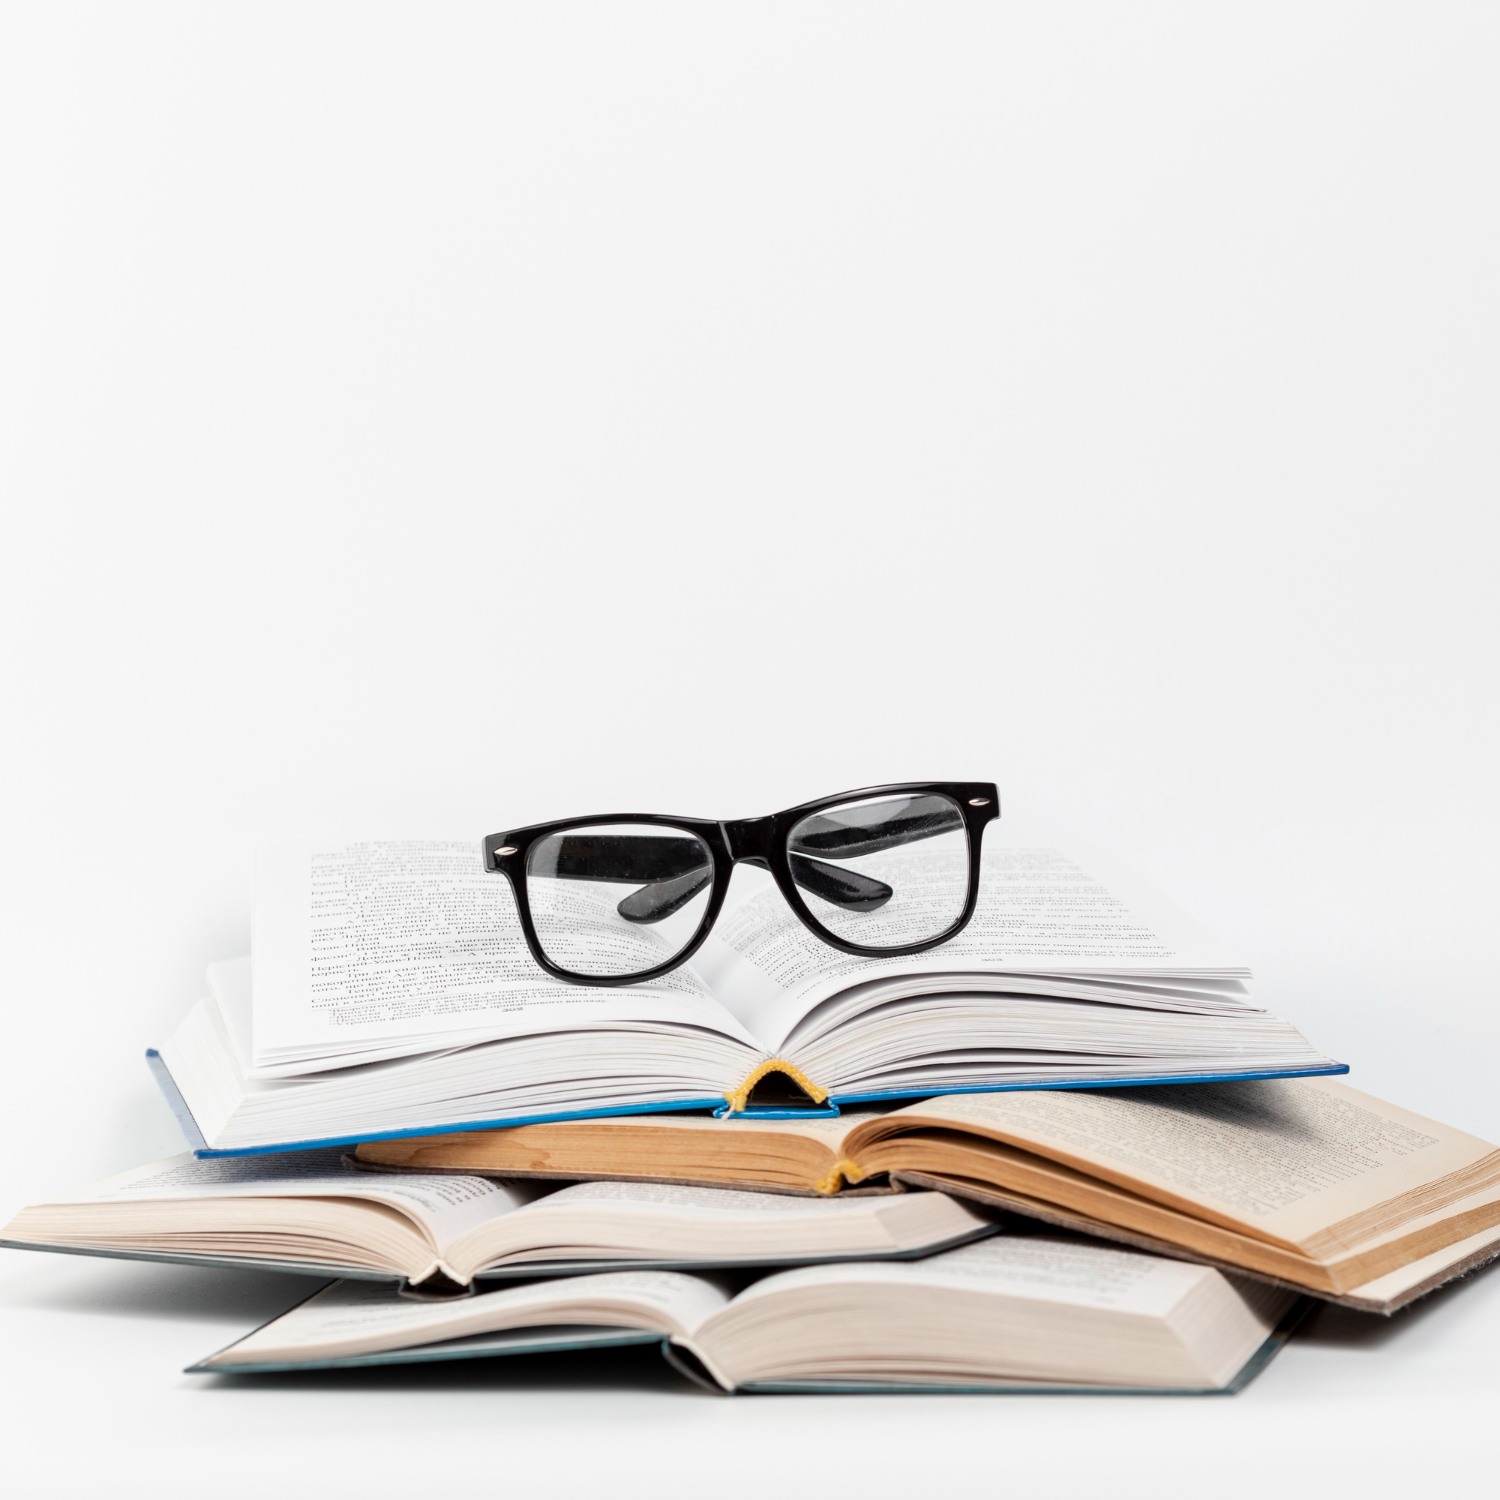 Open books with glasses on top